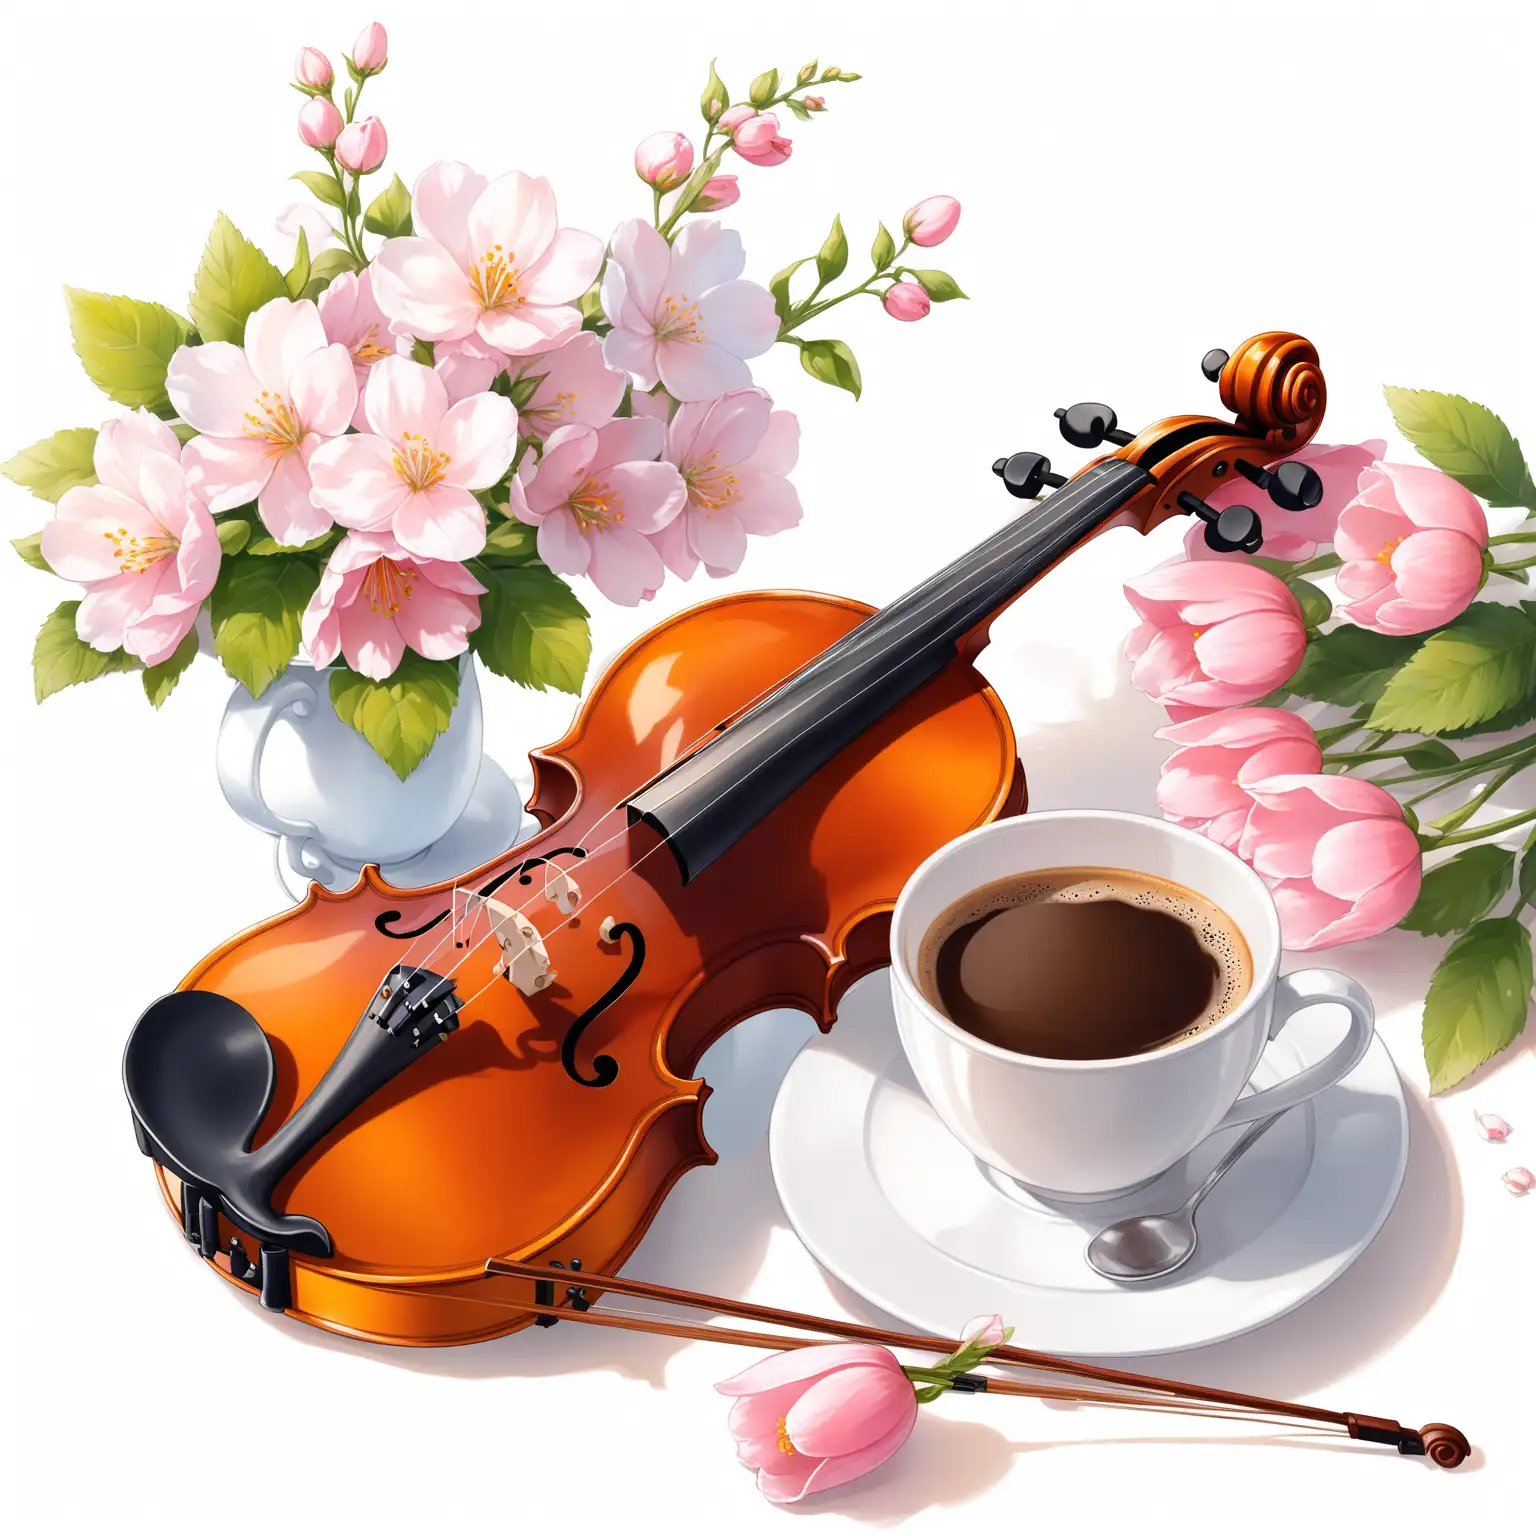 on a white background, there is a beautiful violin on the table, there is an elegant cup of coffee, there are delicate spring flowers